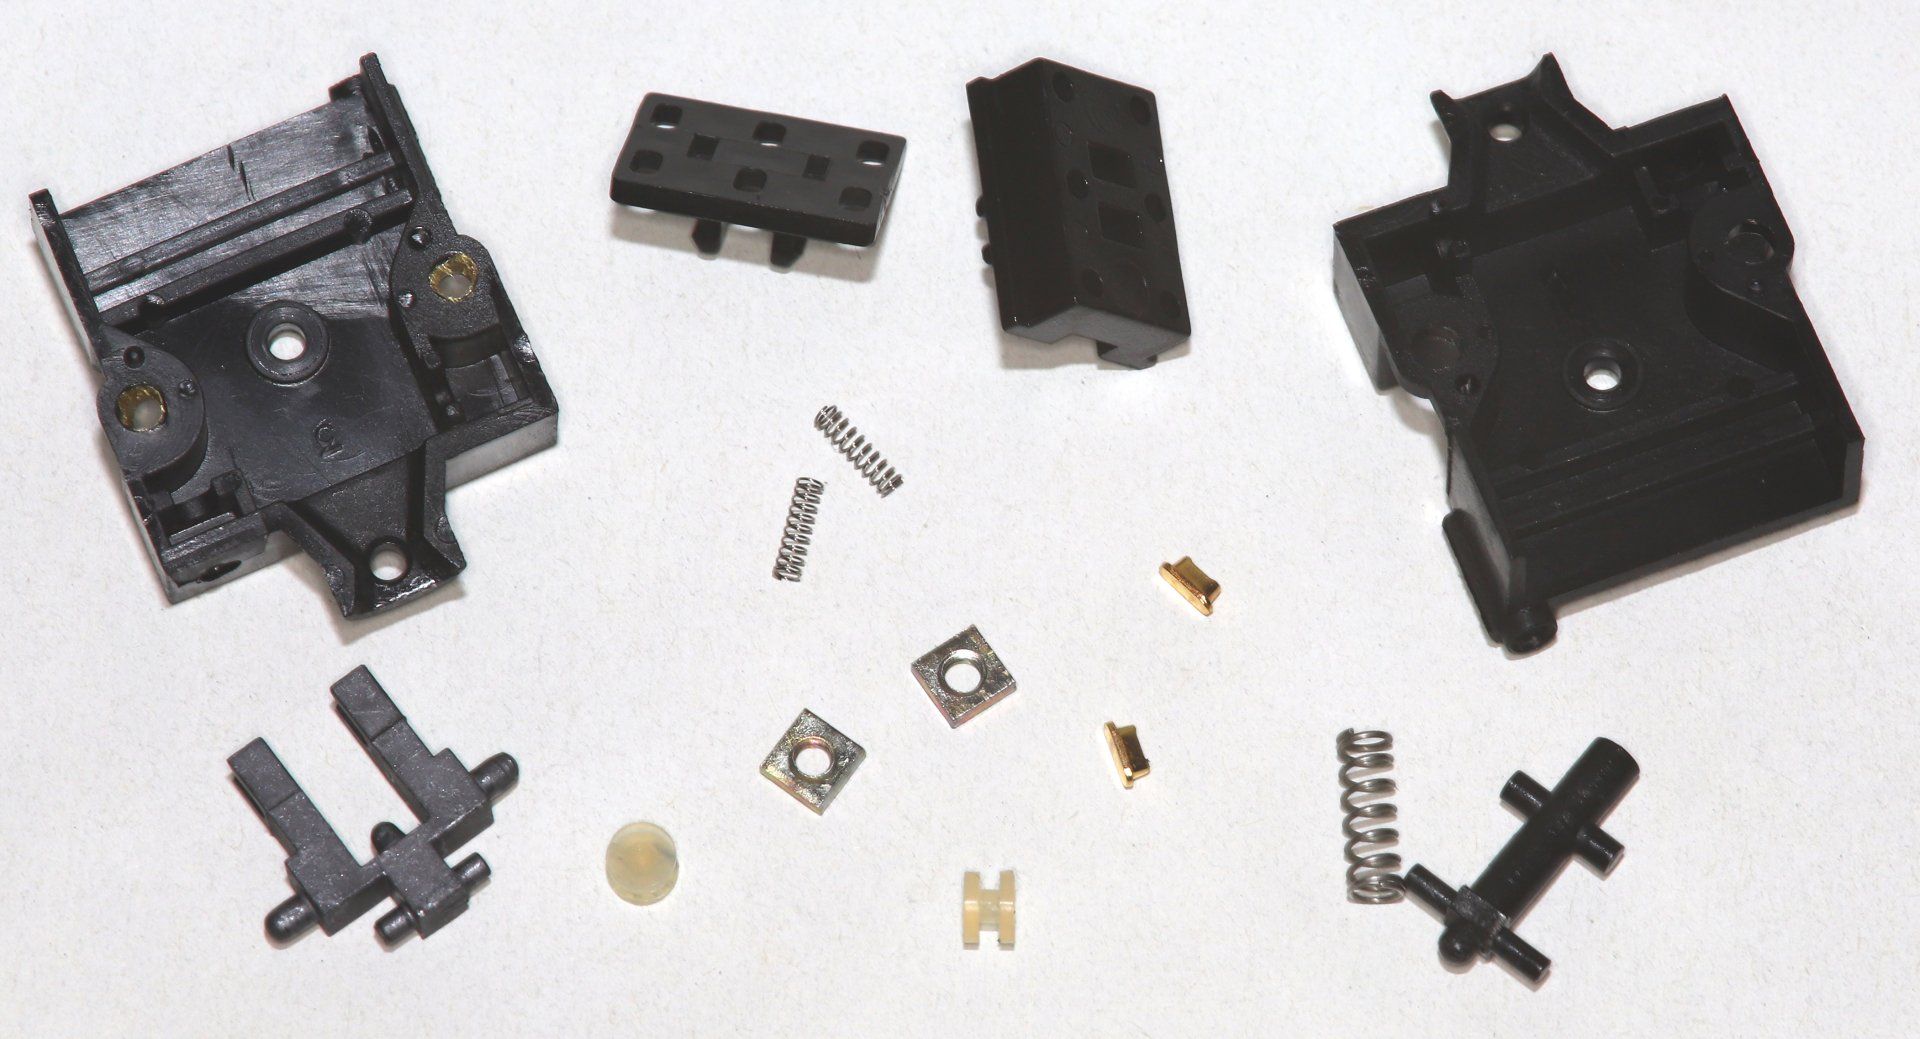 Revox toggle switch completely disassembled